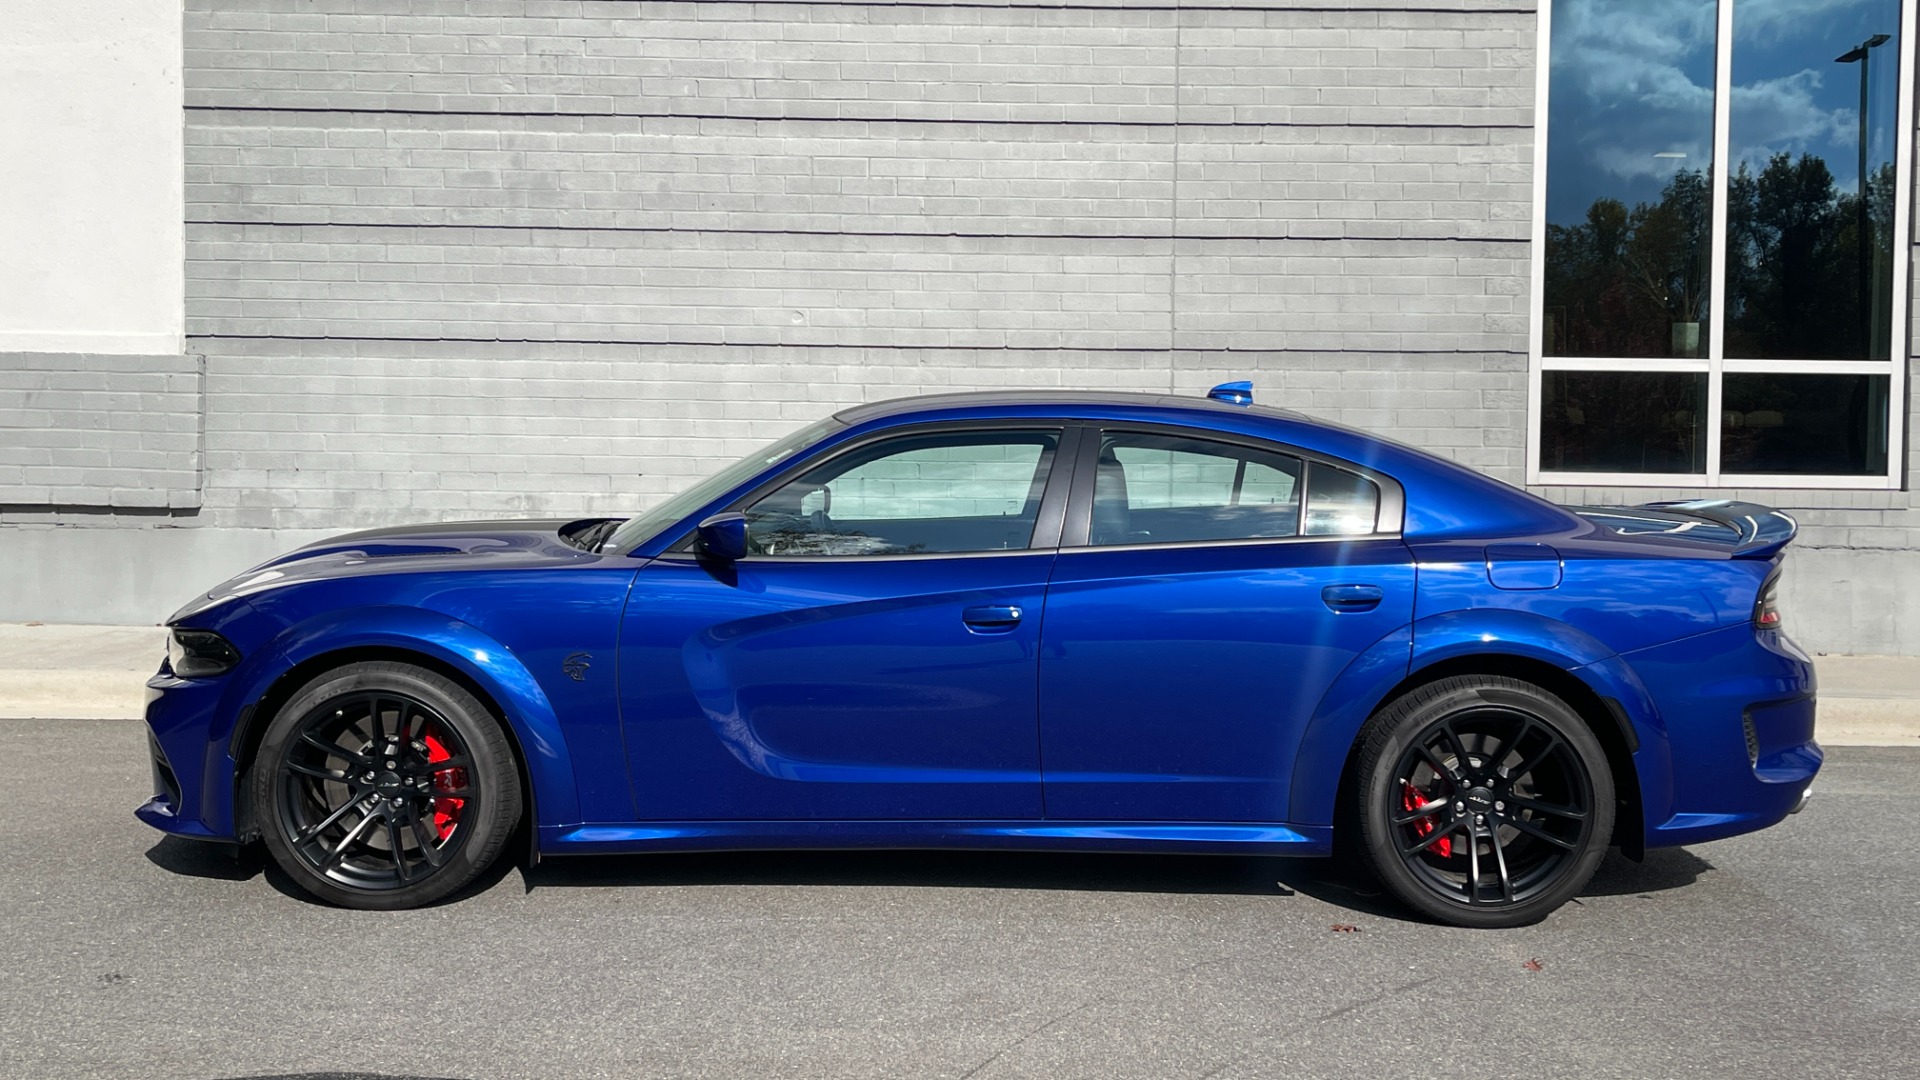 Used 2021 Dodge Charger SRT HELLCAT WIDEBODY / RED KEYS / CARBON STRIPES / 717HP / BREMBO BRAKES for sale $82,995 at Formula Imports in Charlotte NC 28227 6